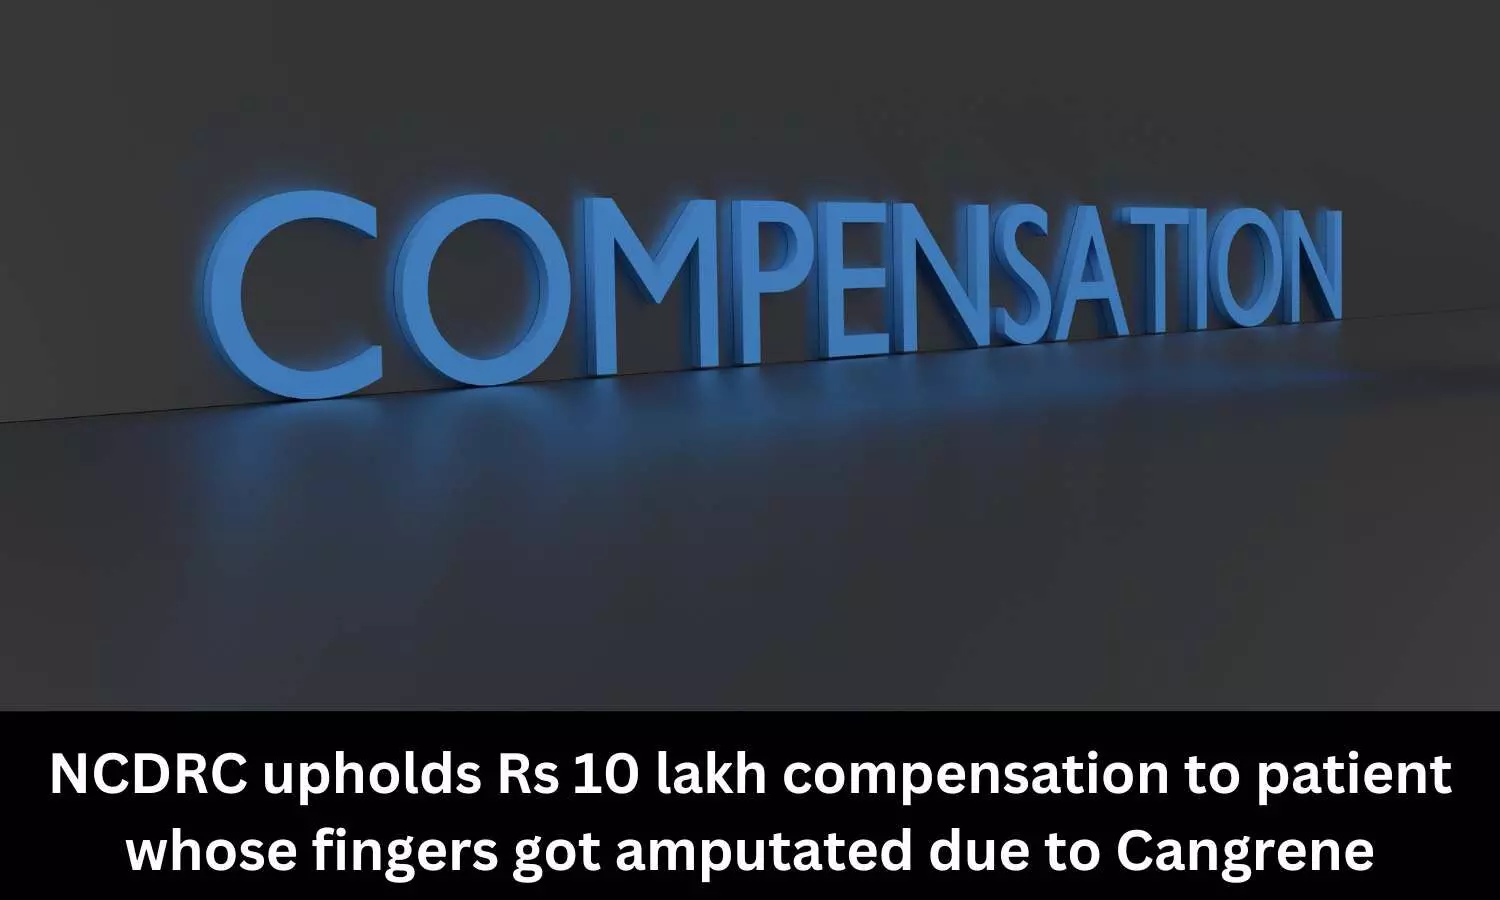 NCDRC upholds Rs 10 lakh compensation to patient whose fingers got amputated due to gangrene